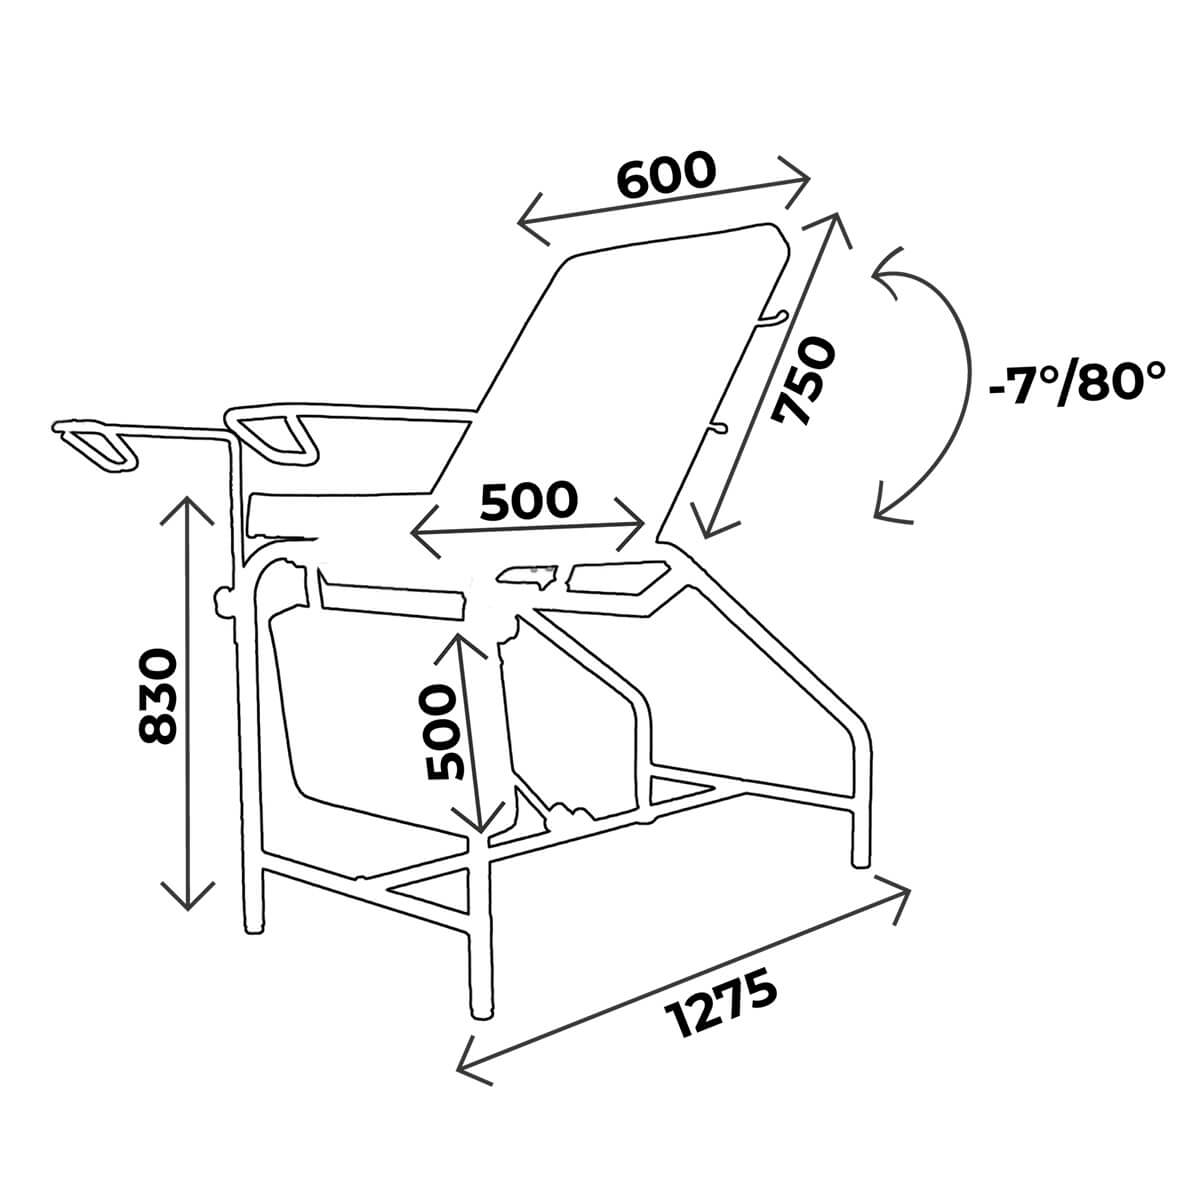 Gynaecological chair 3 sections, with stirrups